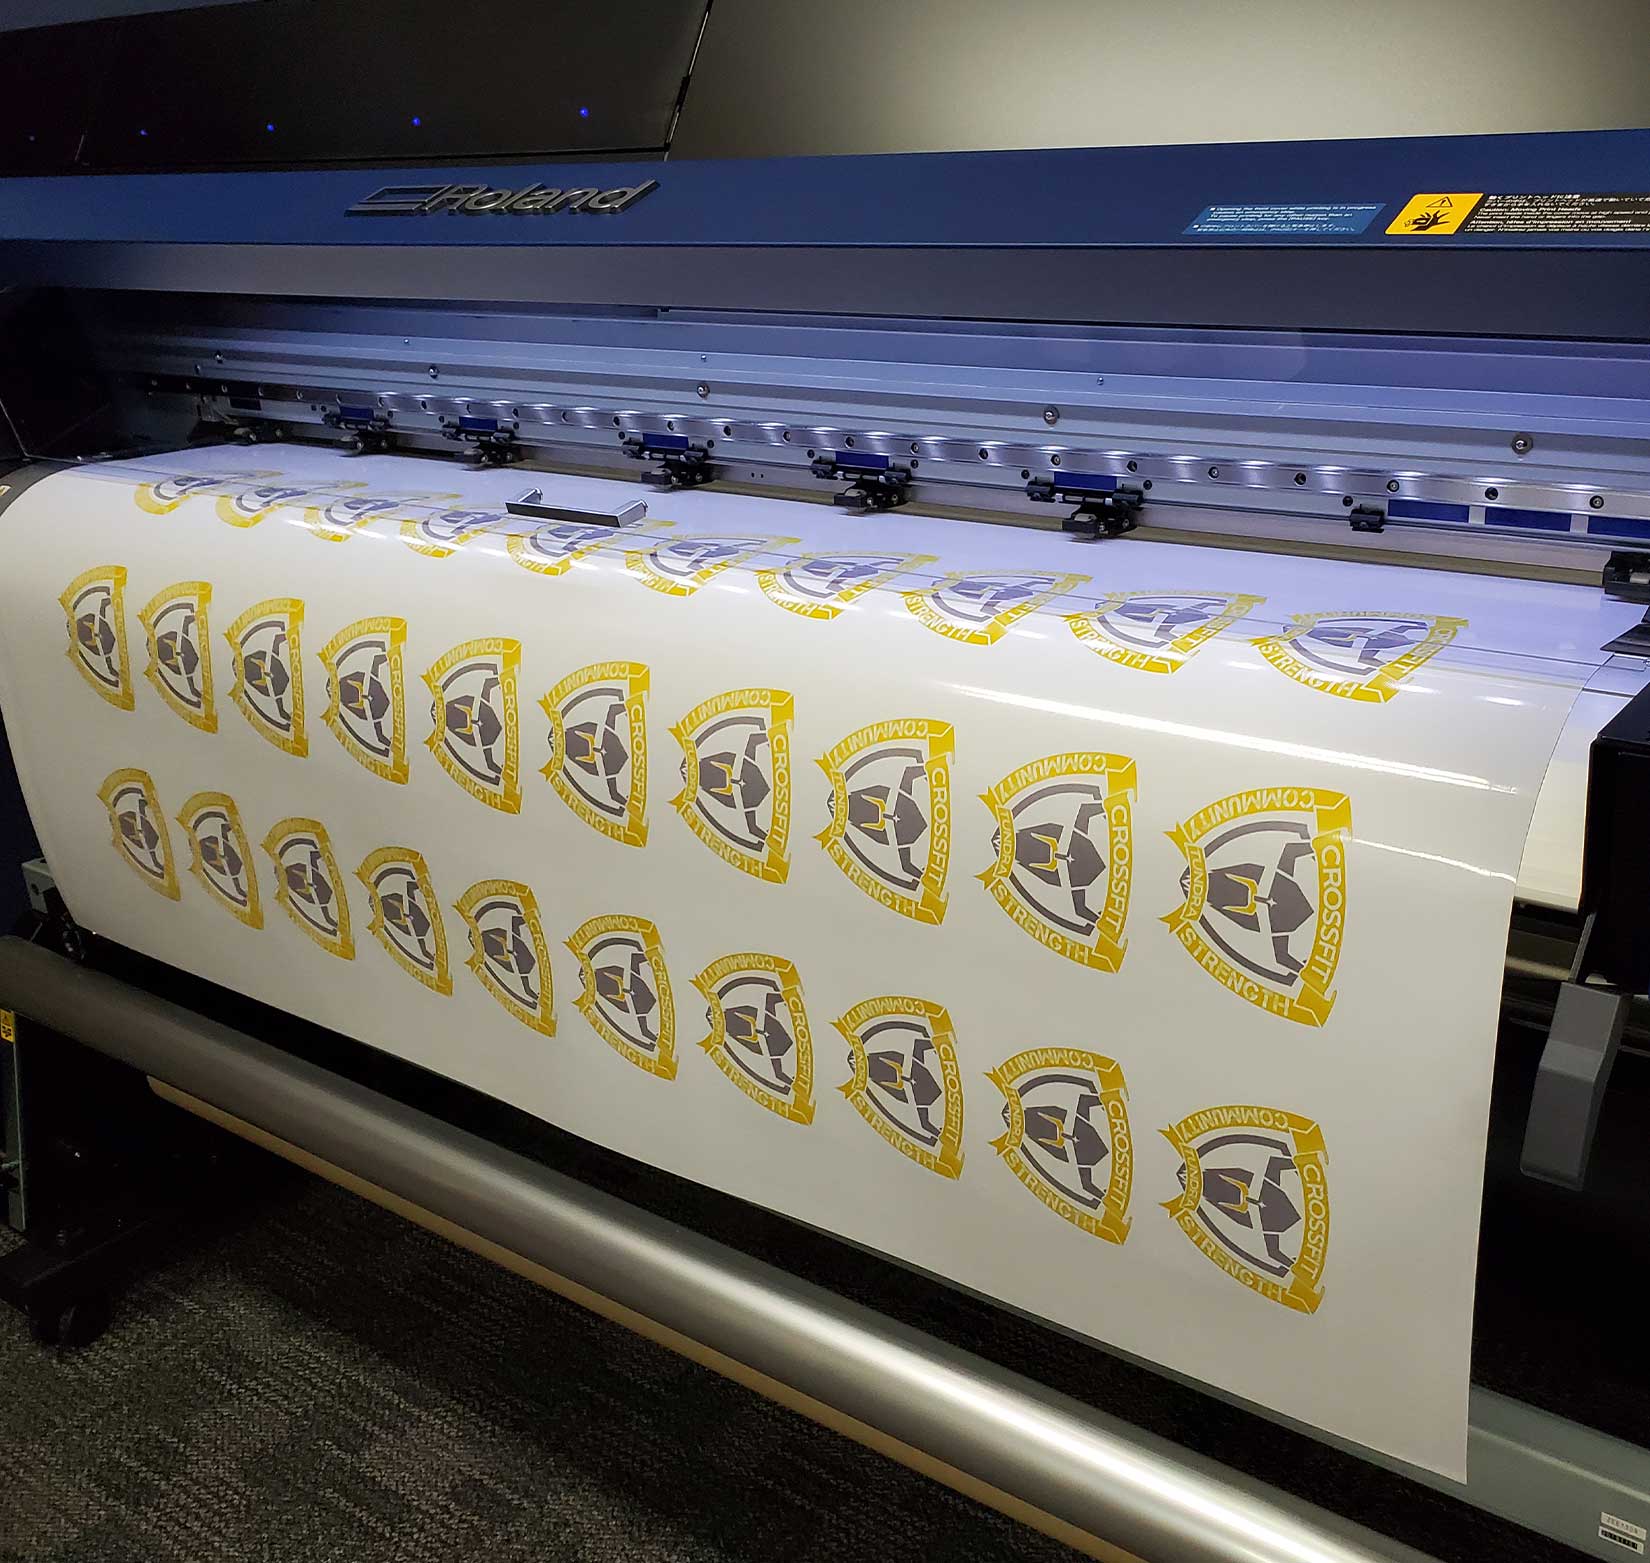 Professional label printing by Stray Media Group